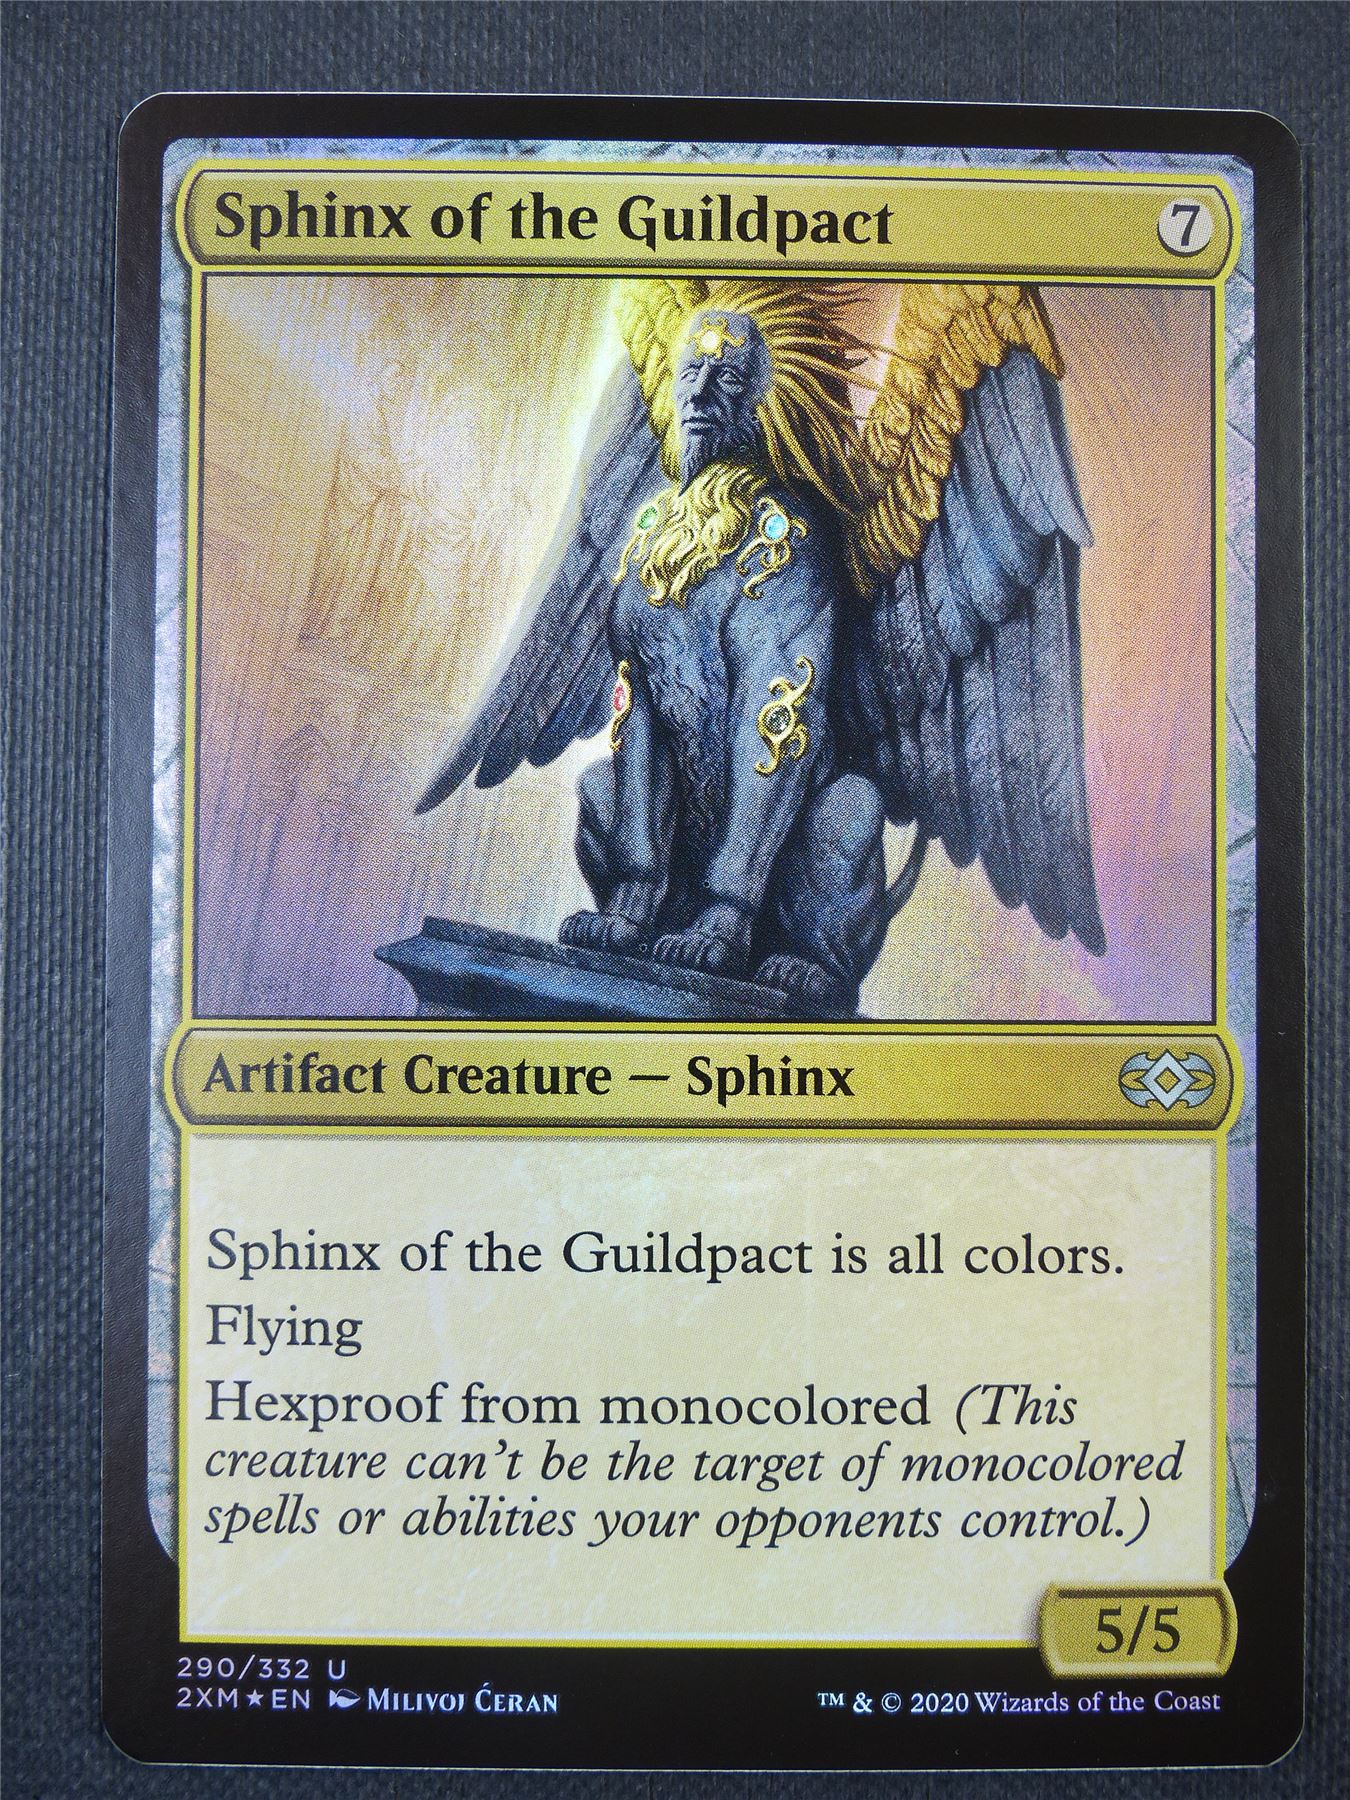 Sphinx of the Guildpact Foil - Mtg Card #5ZH